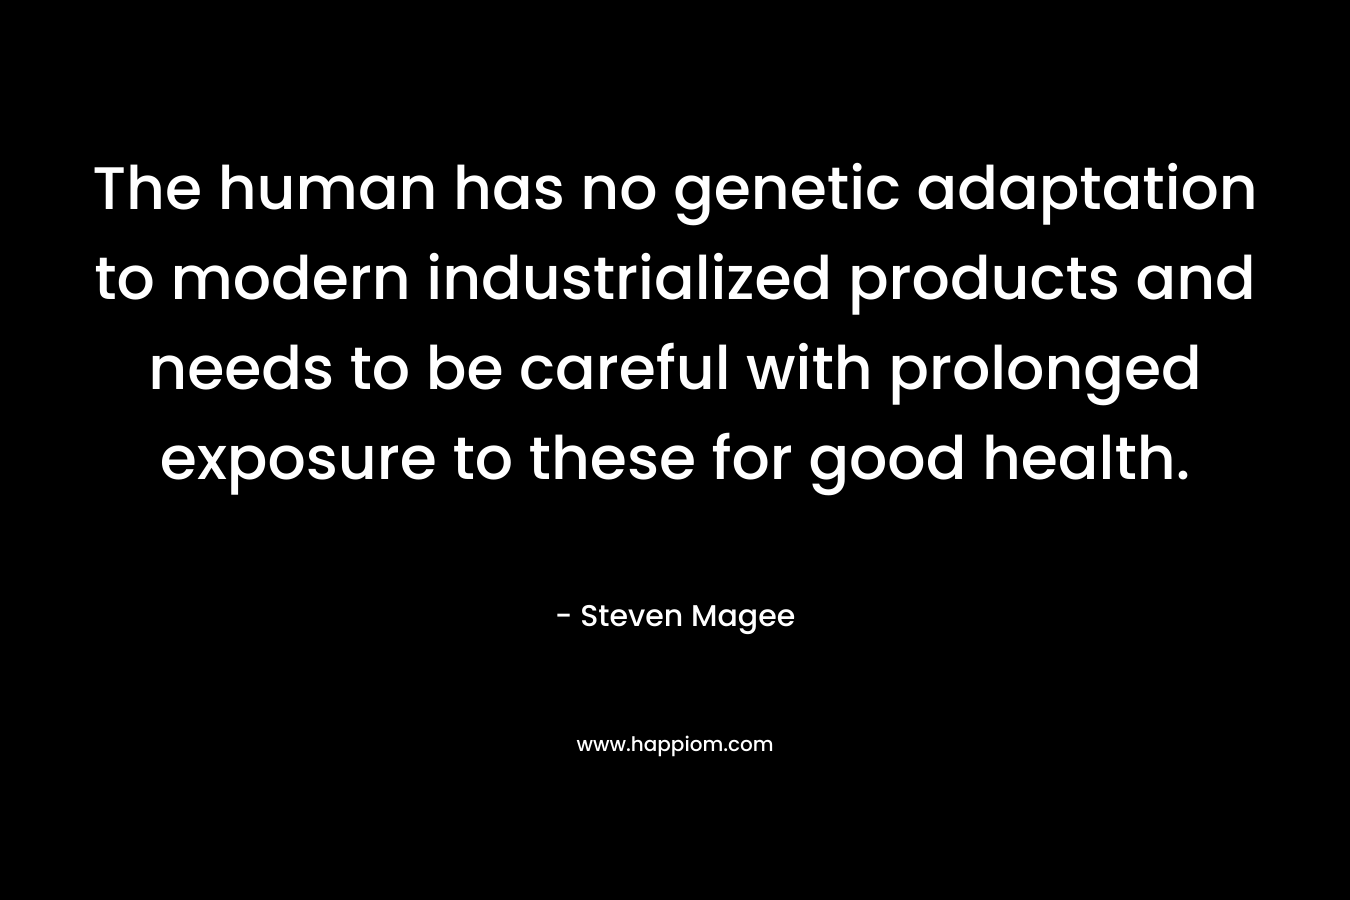 The human has no genetic adaptation to modern industrialized products and needs to be careful with prolonged exposure to these for good health. – Steven Magee